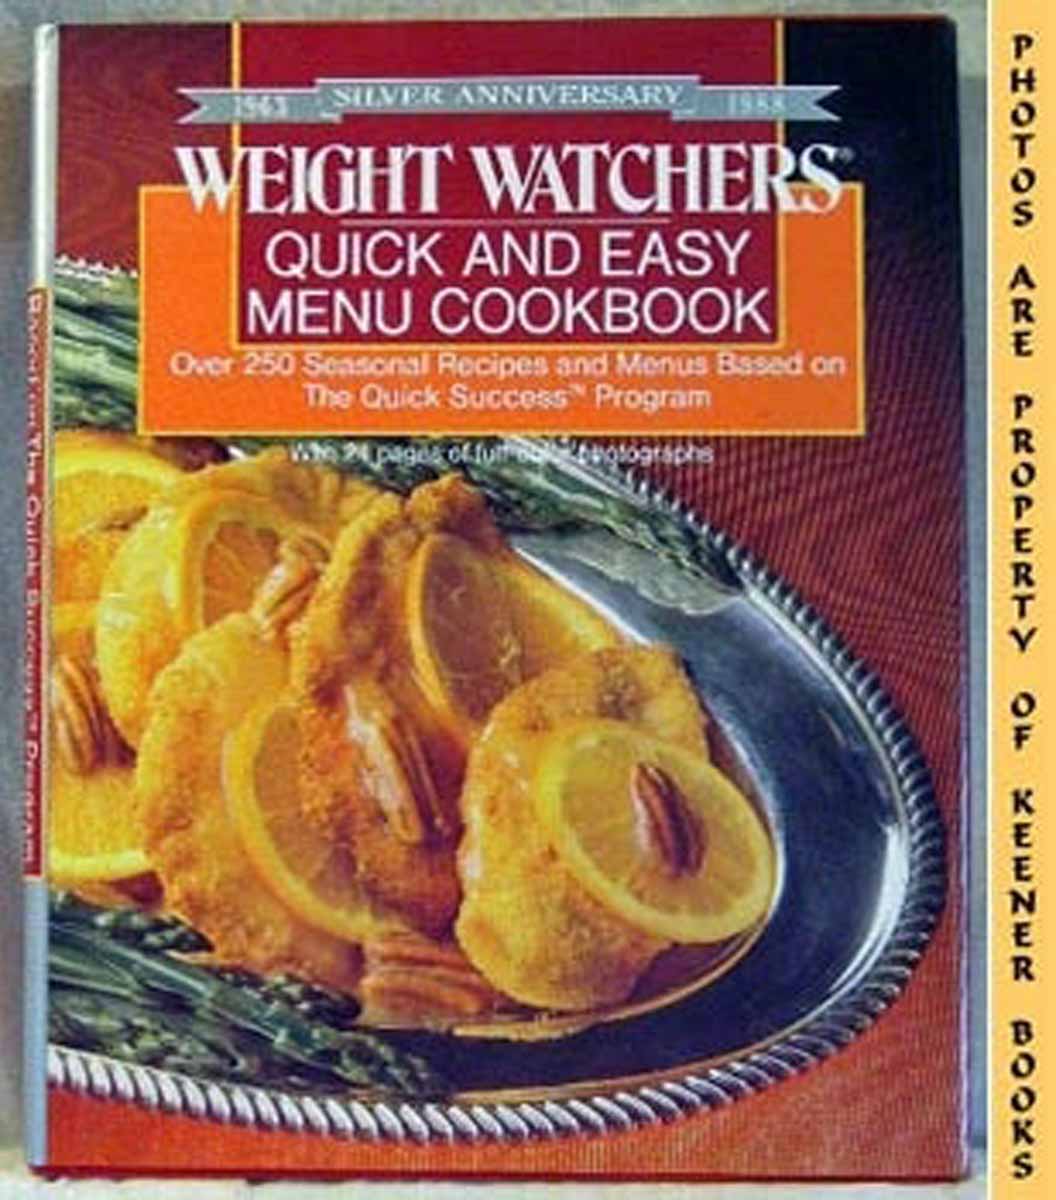 (NO AUTHOR LISTED) - Weight Watchers Quick and Easy Menu Cookbook : Over 250 Seasonal Recipes and Menus Based on the Quick Success Program